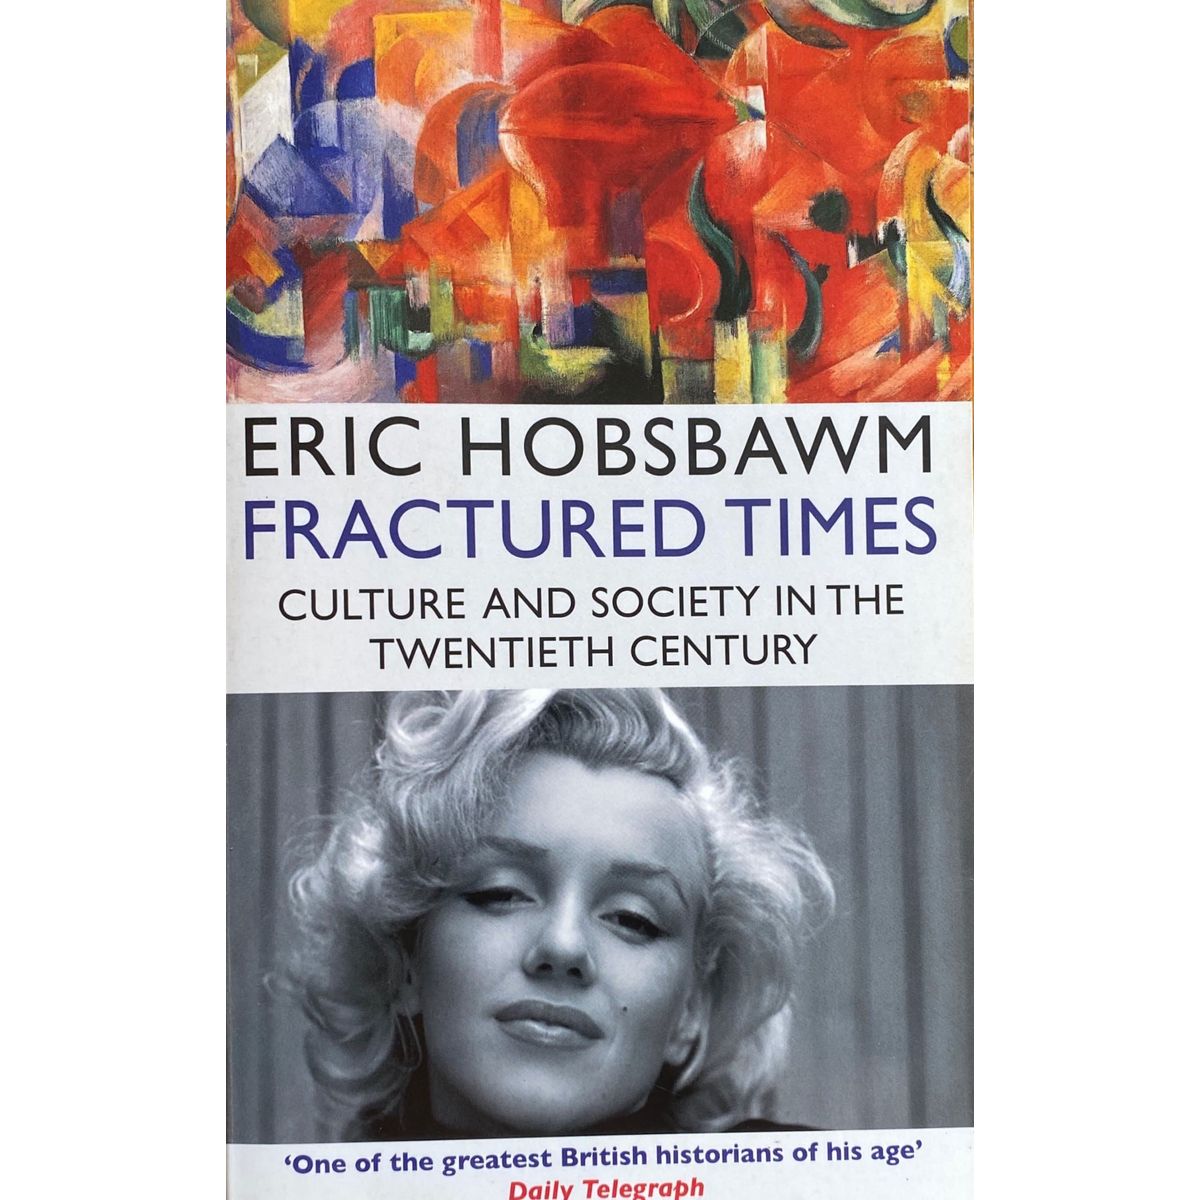 ISBN: 9781405519748 / 1405519746 - Fractured Times: Culture and Society in the Twentieth Century by Eric Hobsbawm [2013]